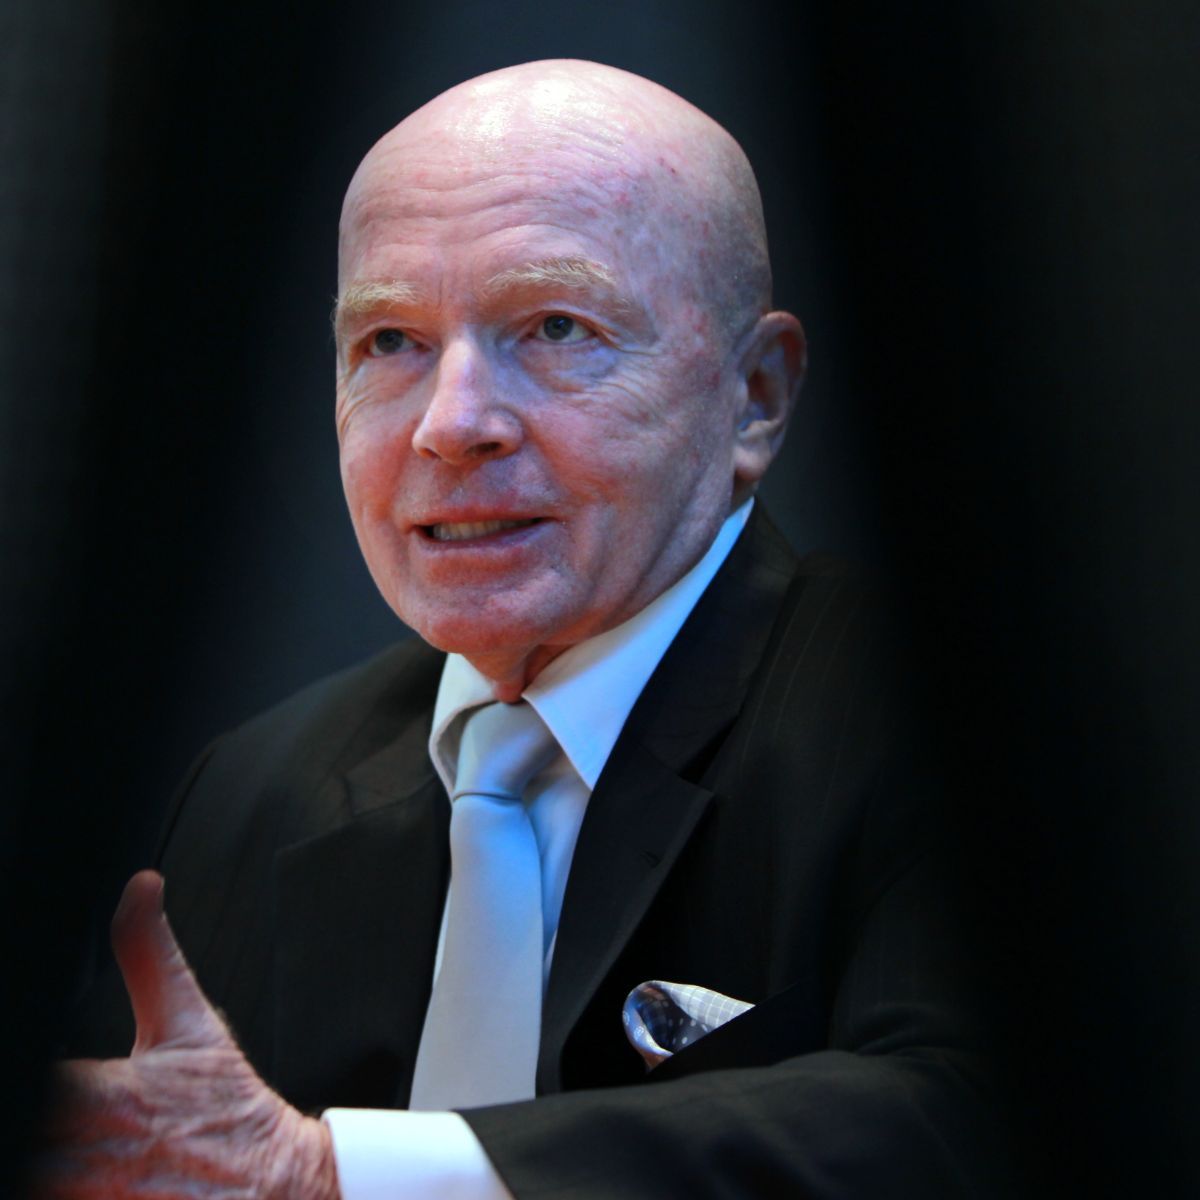 mark mobius net worth forbes